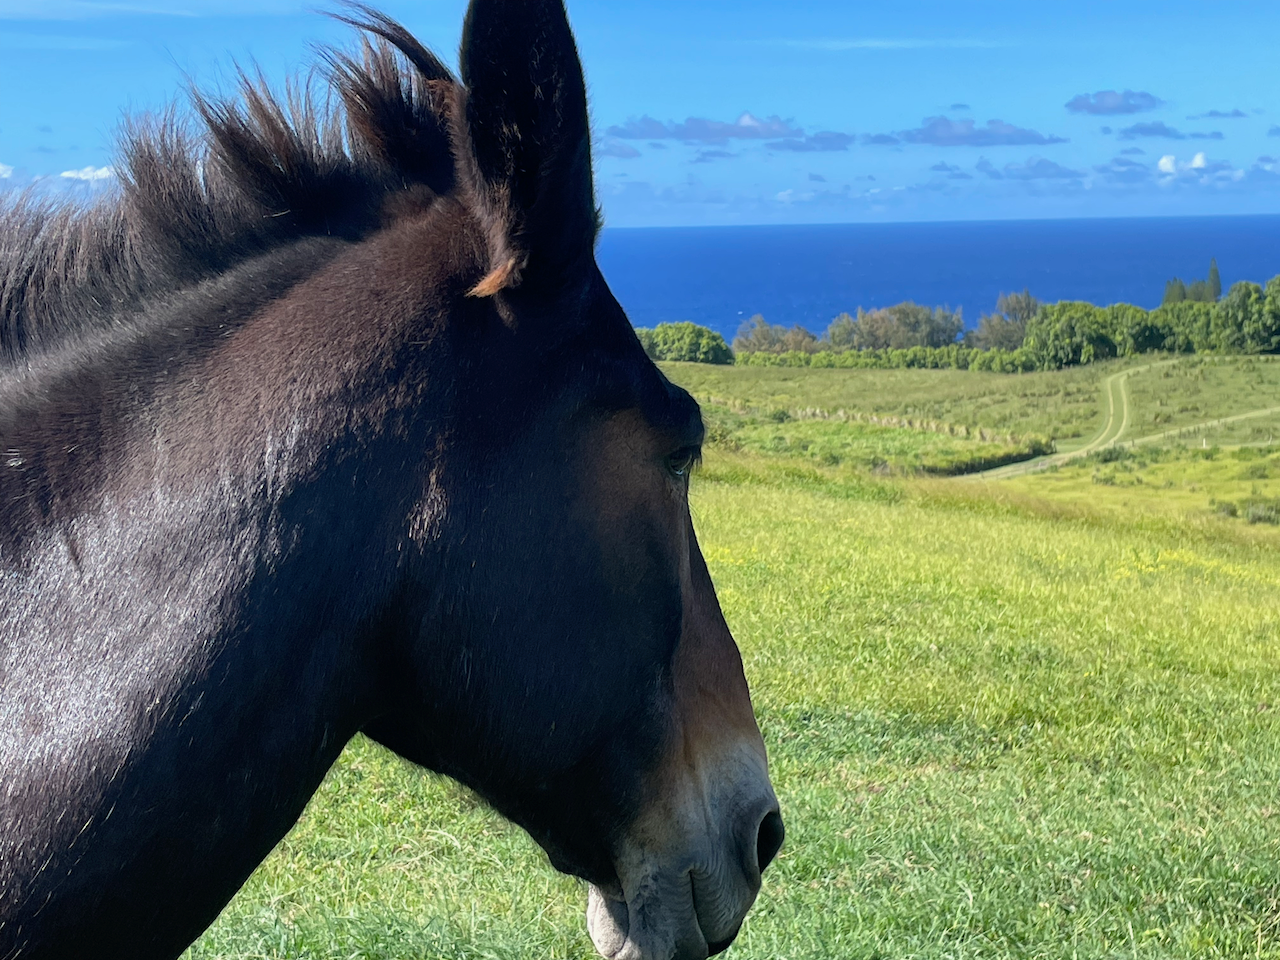 a close profile of a dark brown donkey, looking into the distance past a bright green field and a distant dark blue Pacific Ocean.